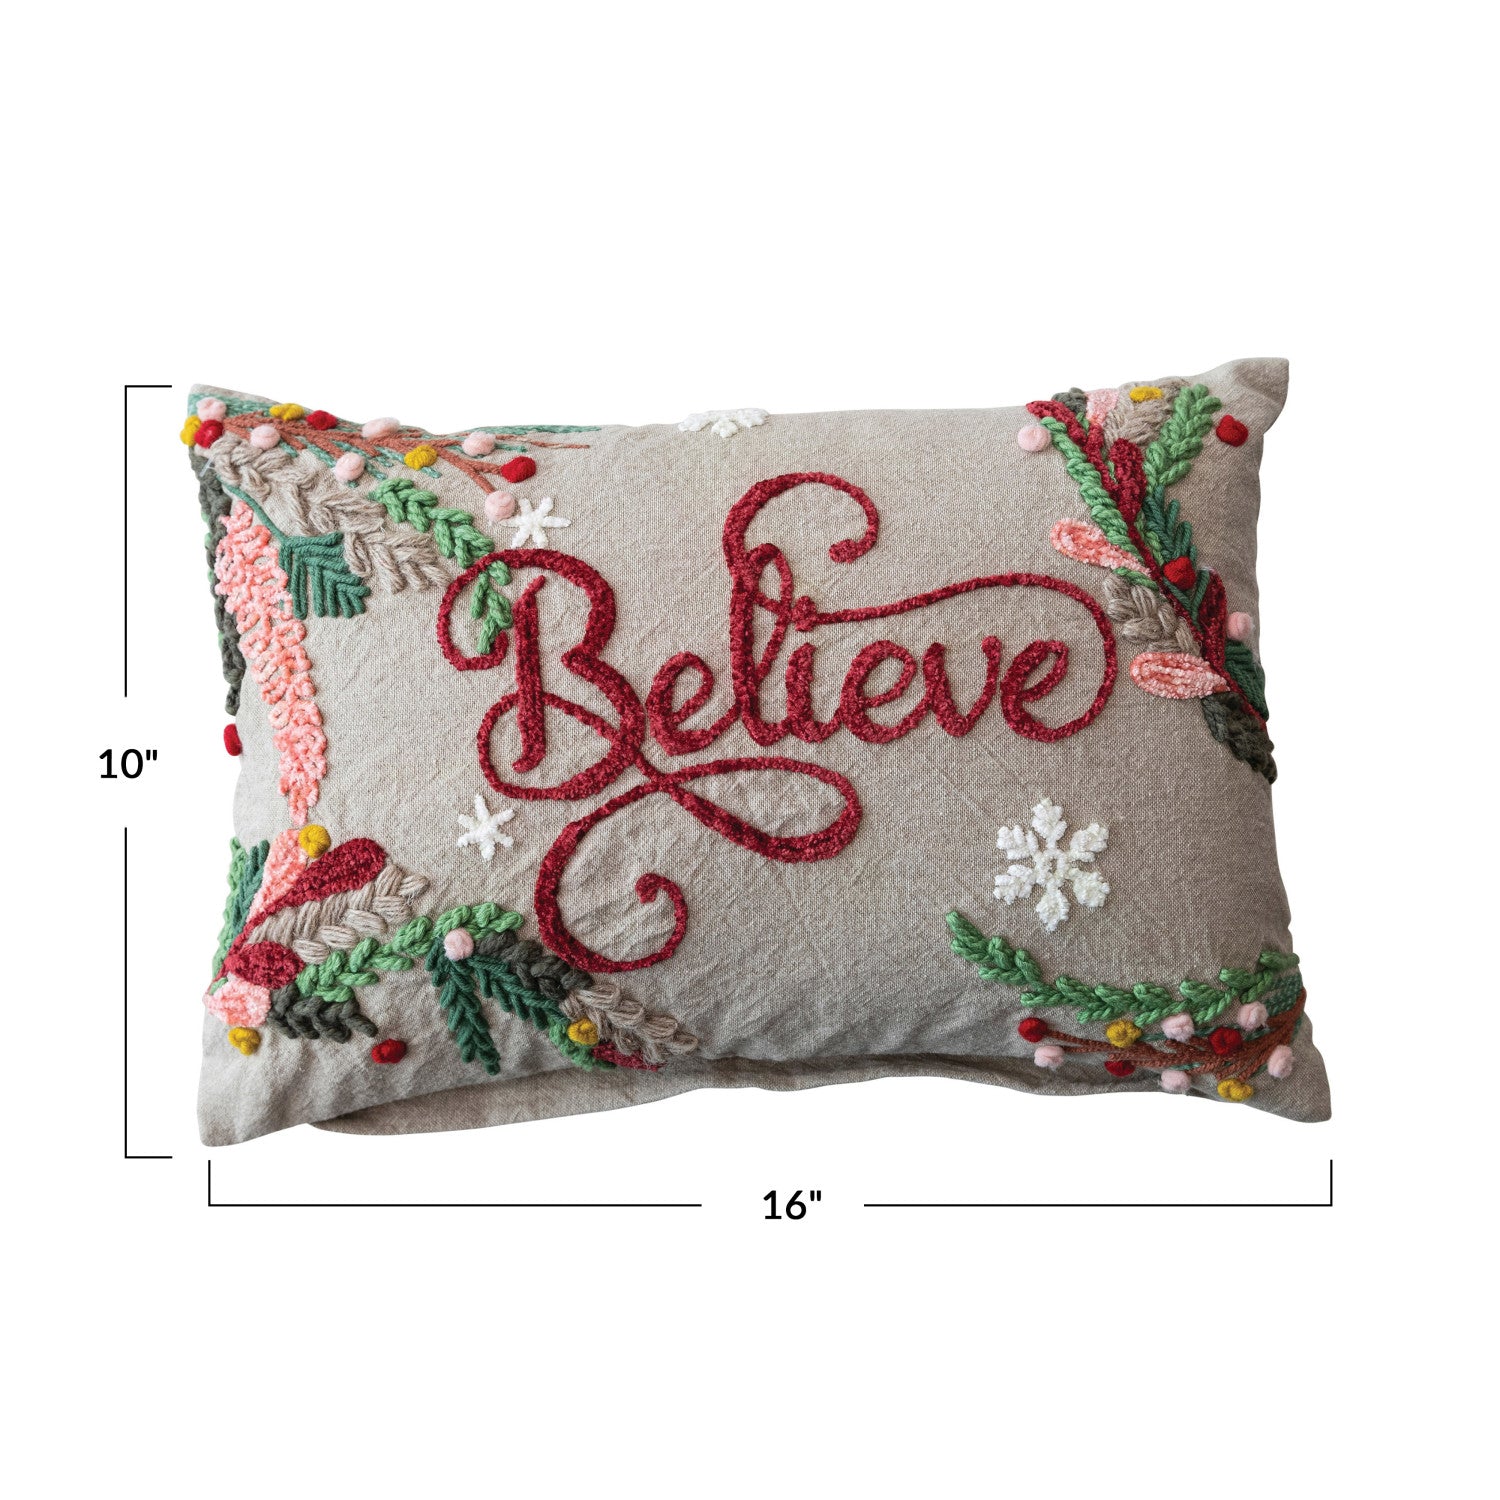 Embroidered Lumbar Pillow w/ Snowflakes & Foliage "Believe"